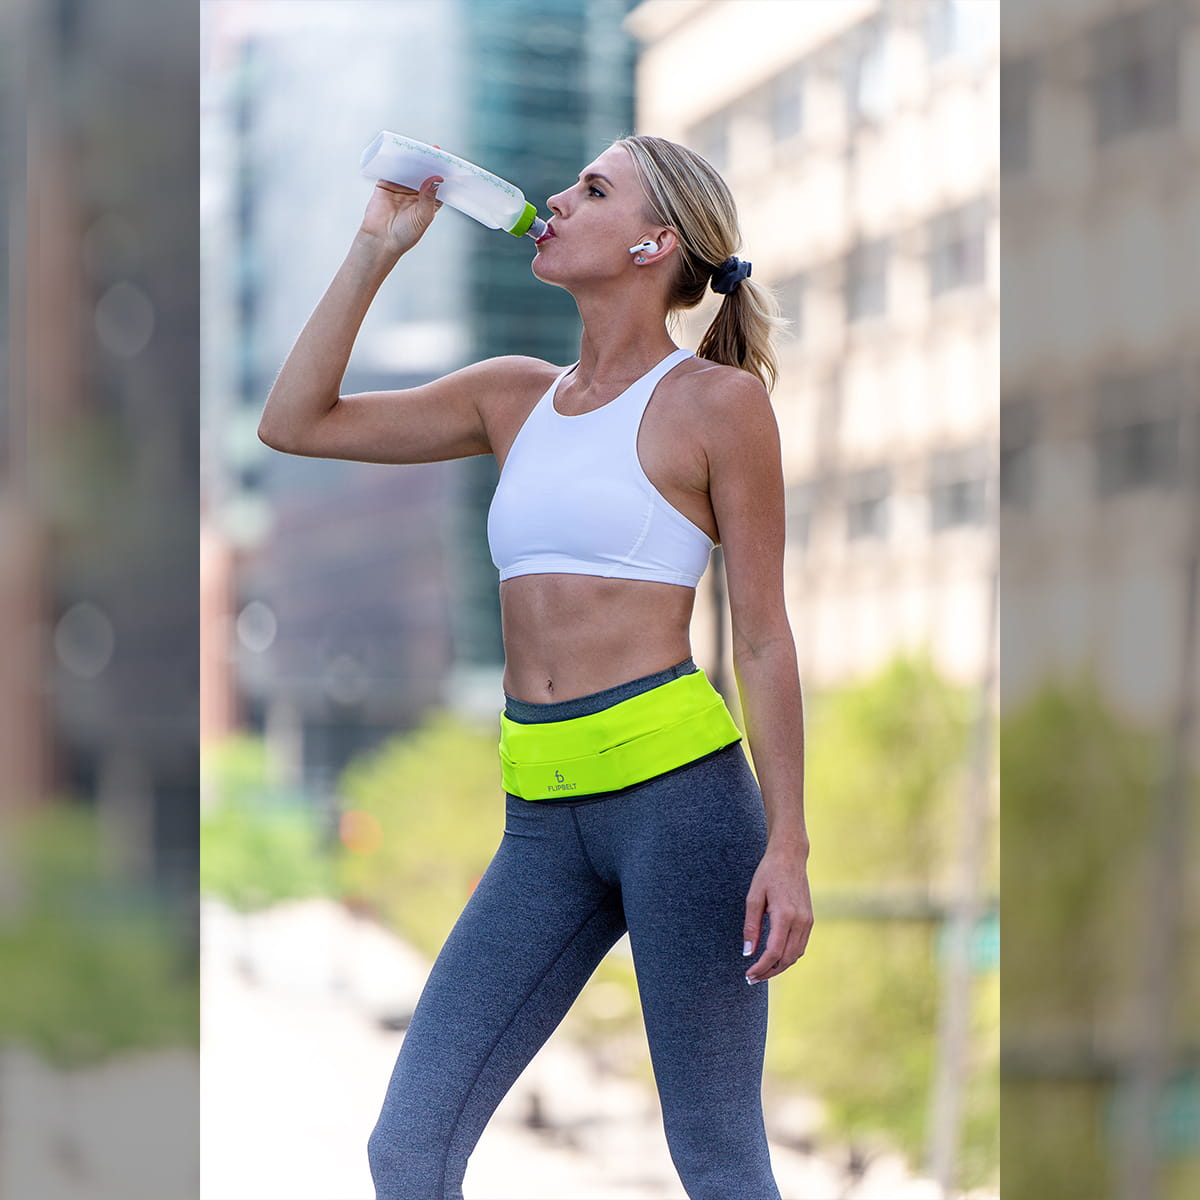 Why a Fitletic Hydration Belt is the Best Choice in Running Belts